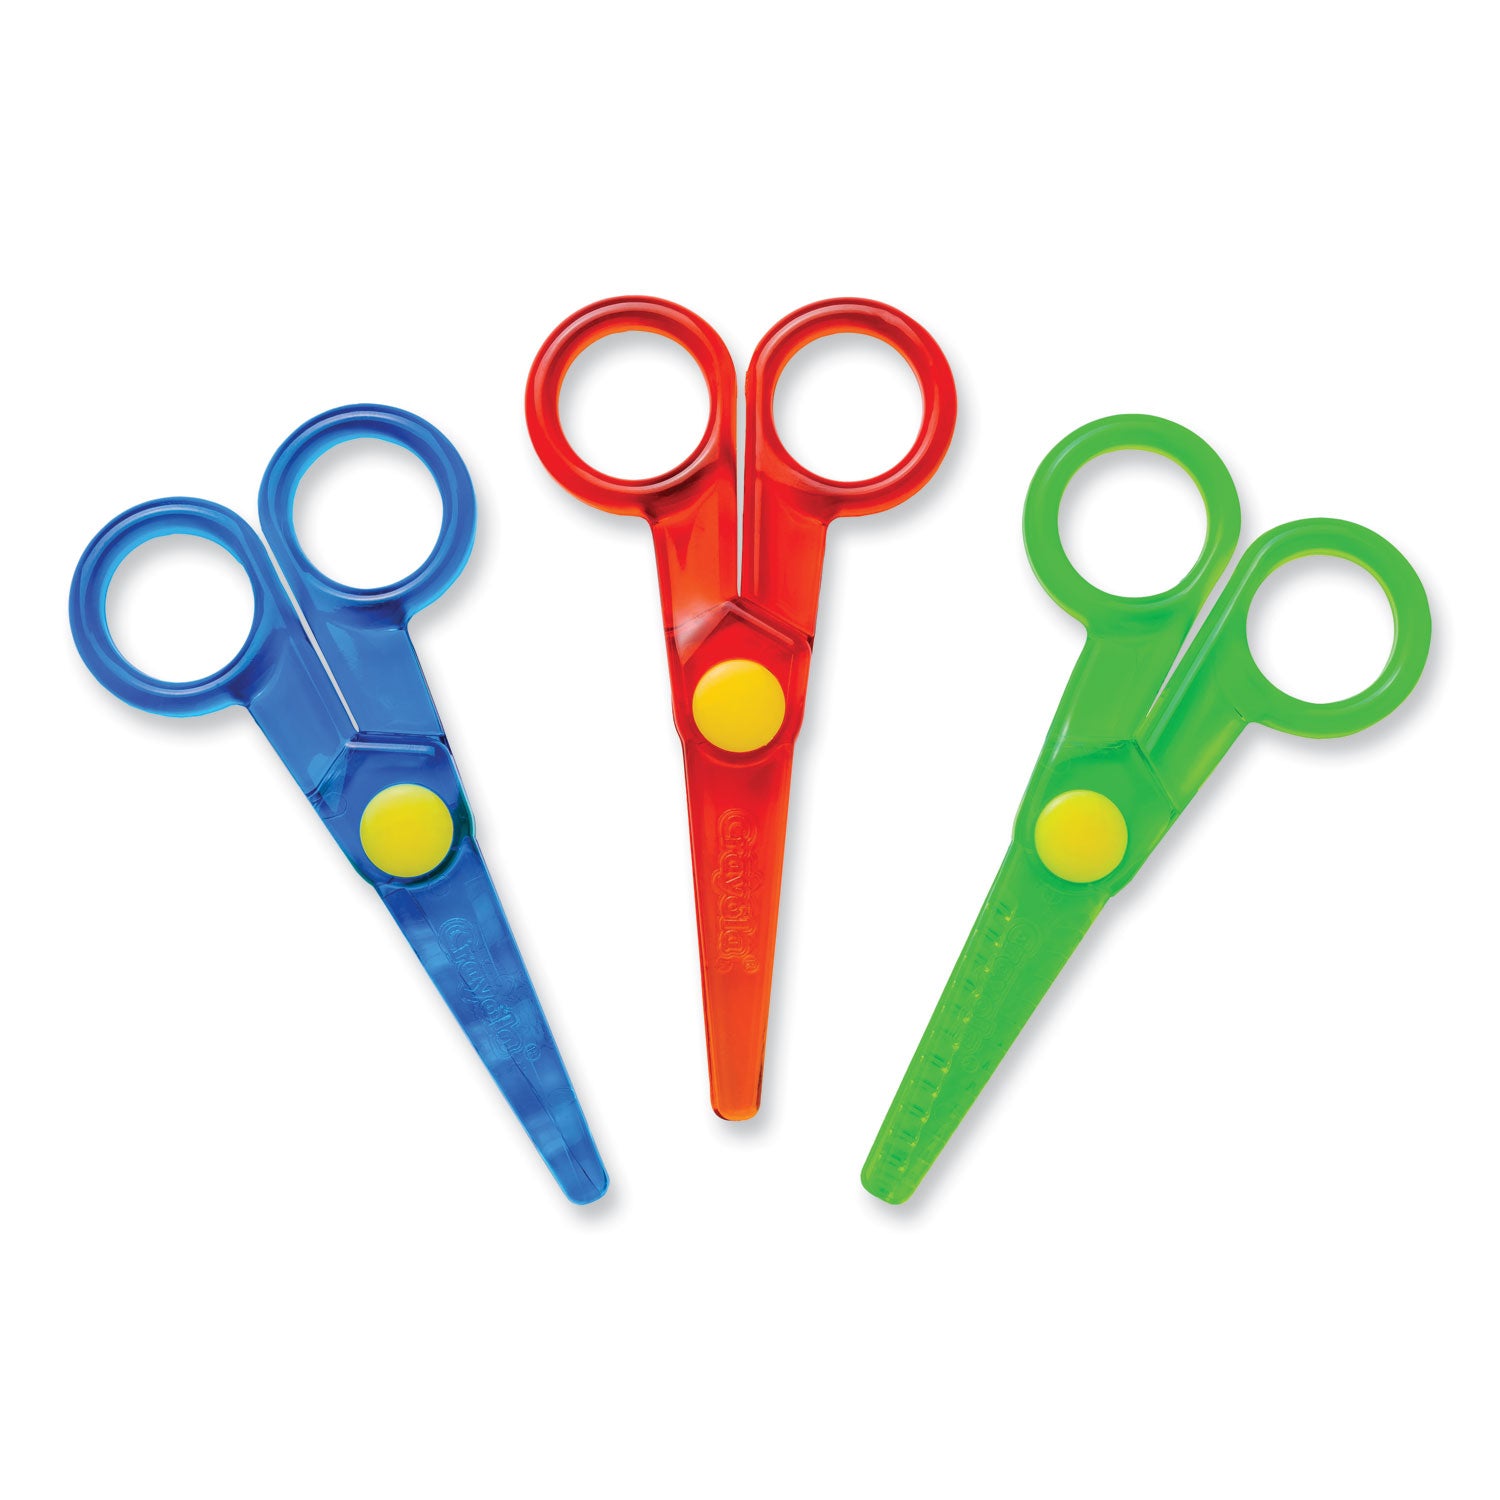 safety-scissors-rounded-tip-straight-handle-assorted-handle-colors-3-pack_cyo811458 - 2